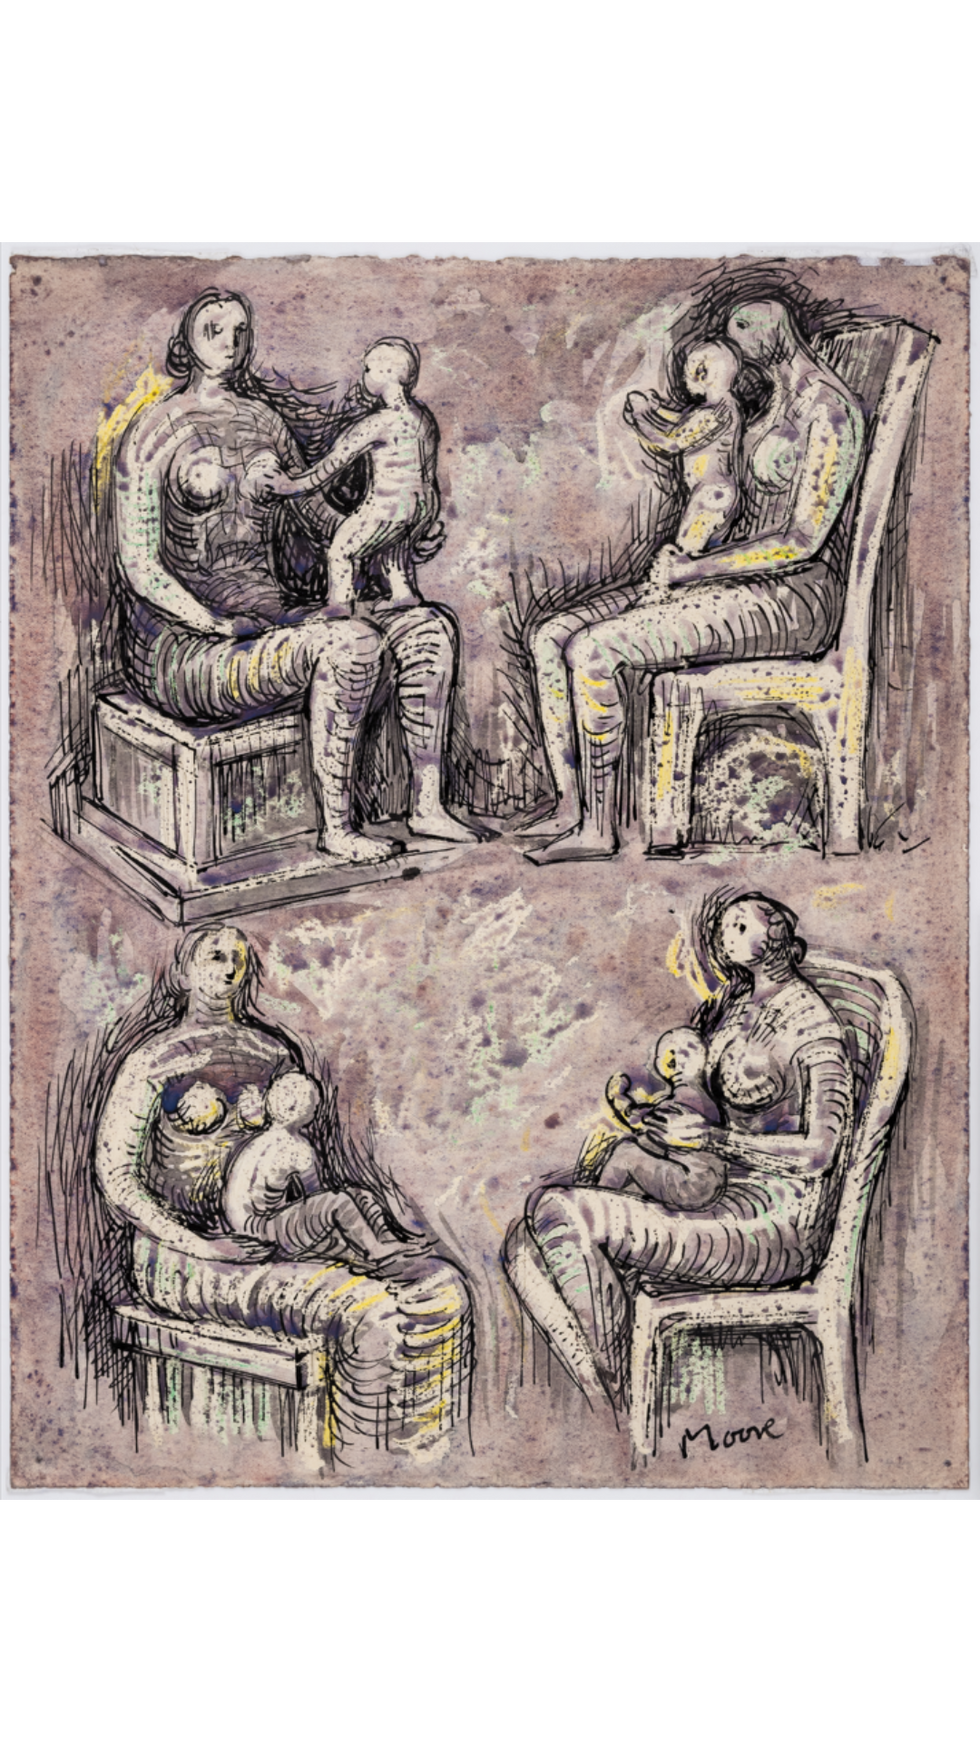 Henry Moore watercolour sells at auction for £25,000 after charity shop purchase